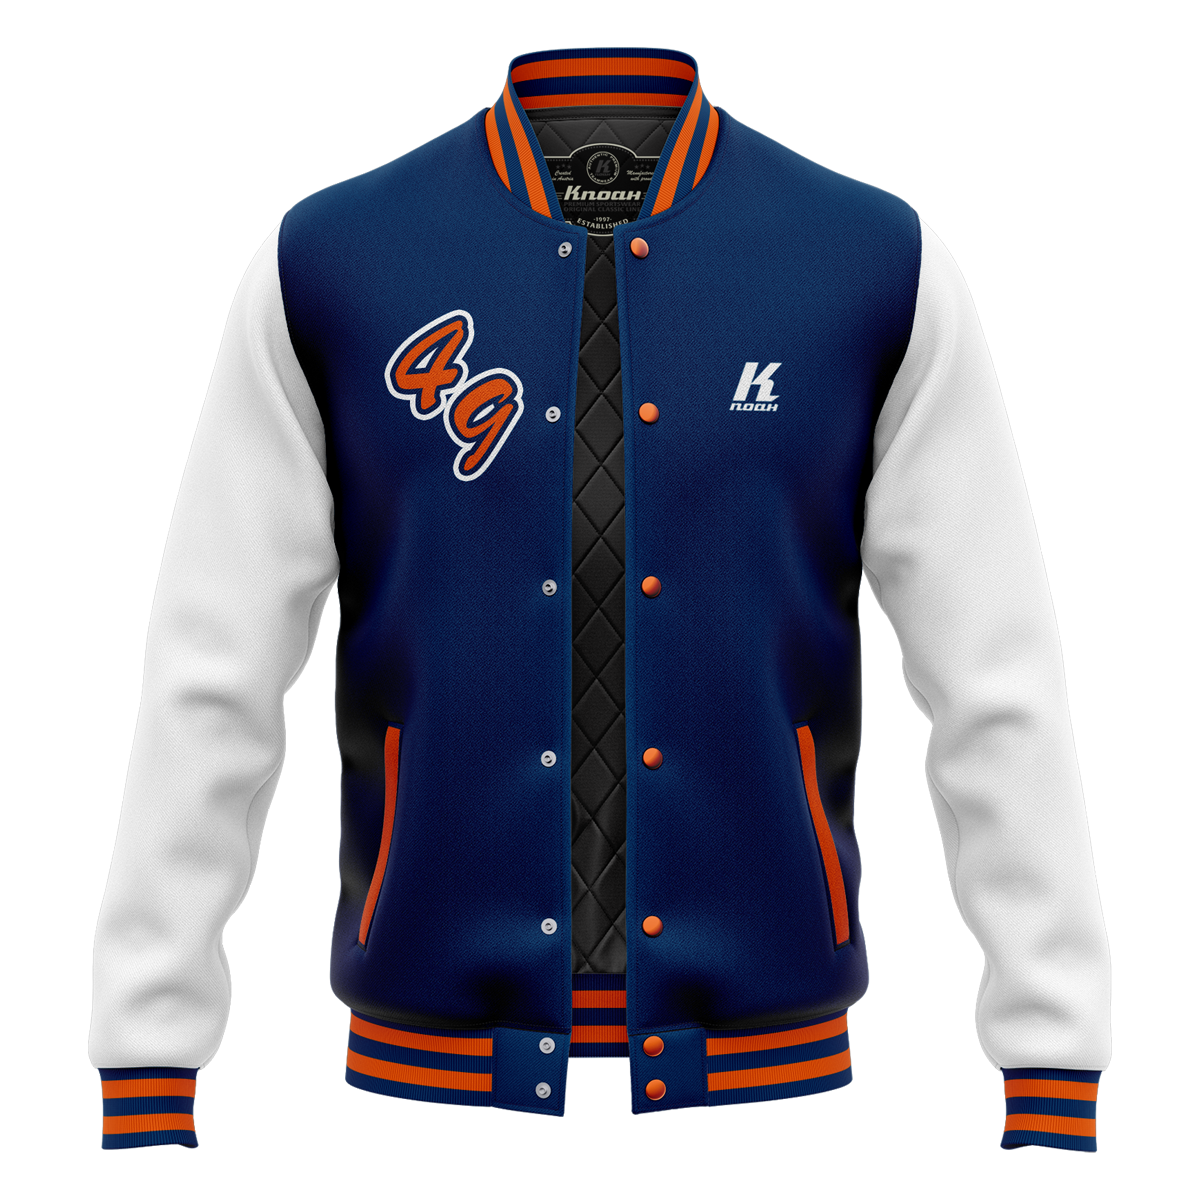 Day 19: "Velocity Storm" Authentic Varsity Jacket with Playernumber/Initials